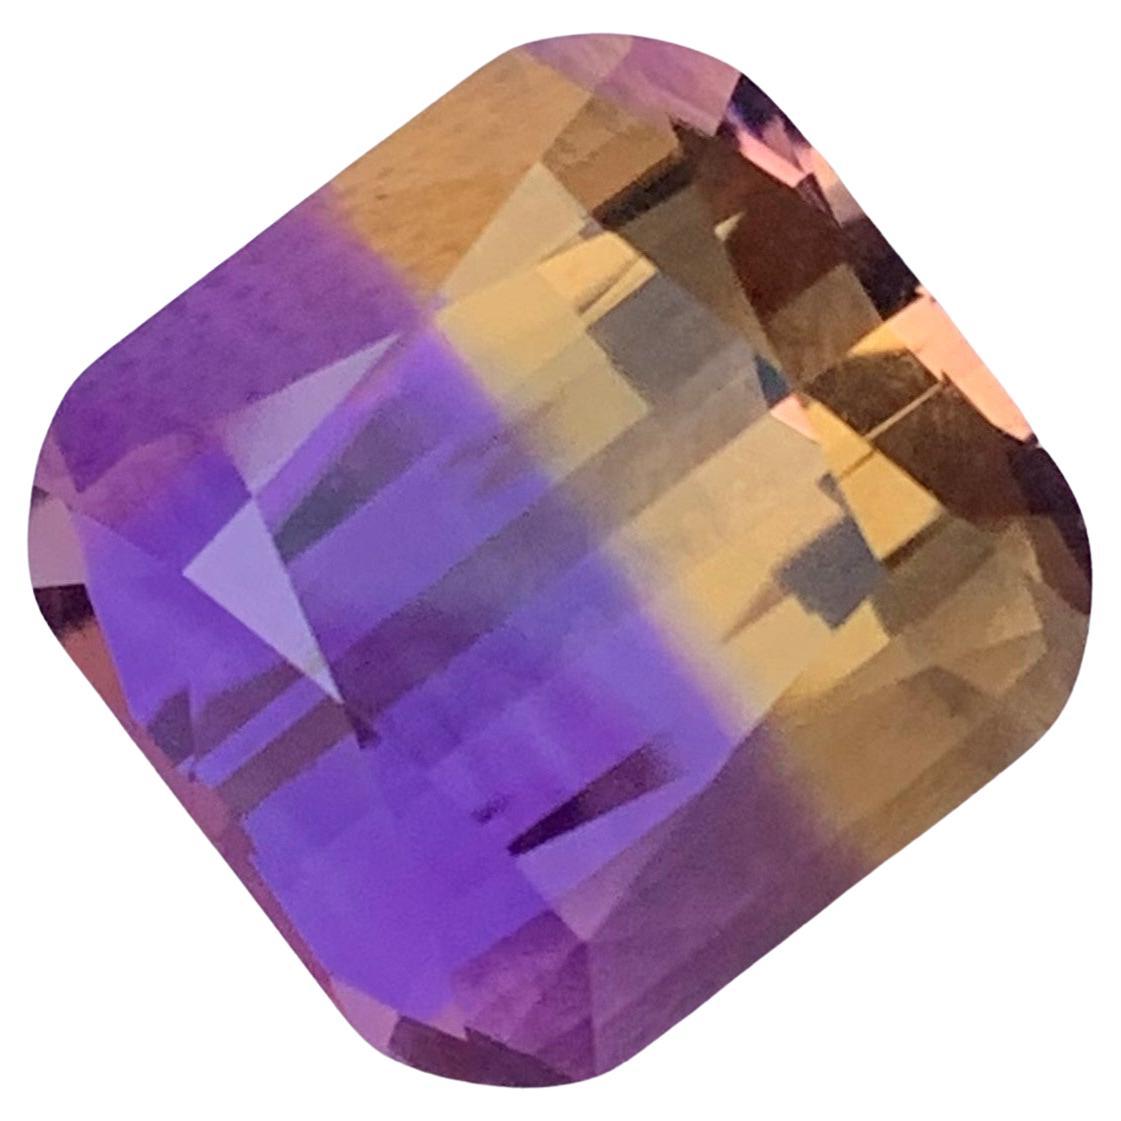 Gorgeous 14.25 Carat Loose Ametrine from Bolivia